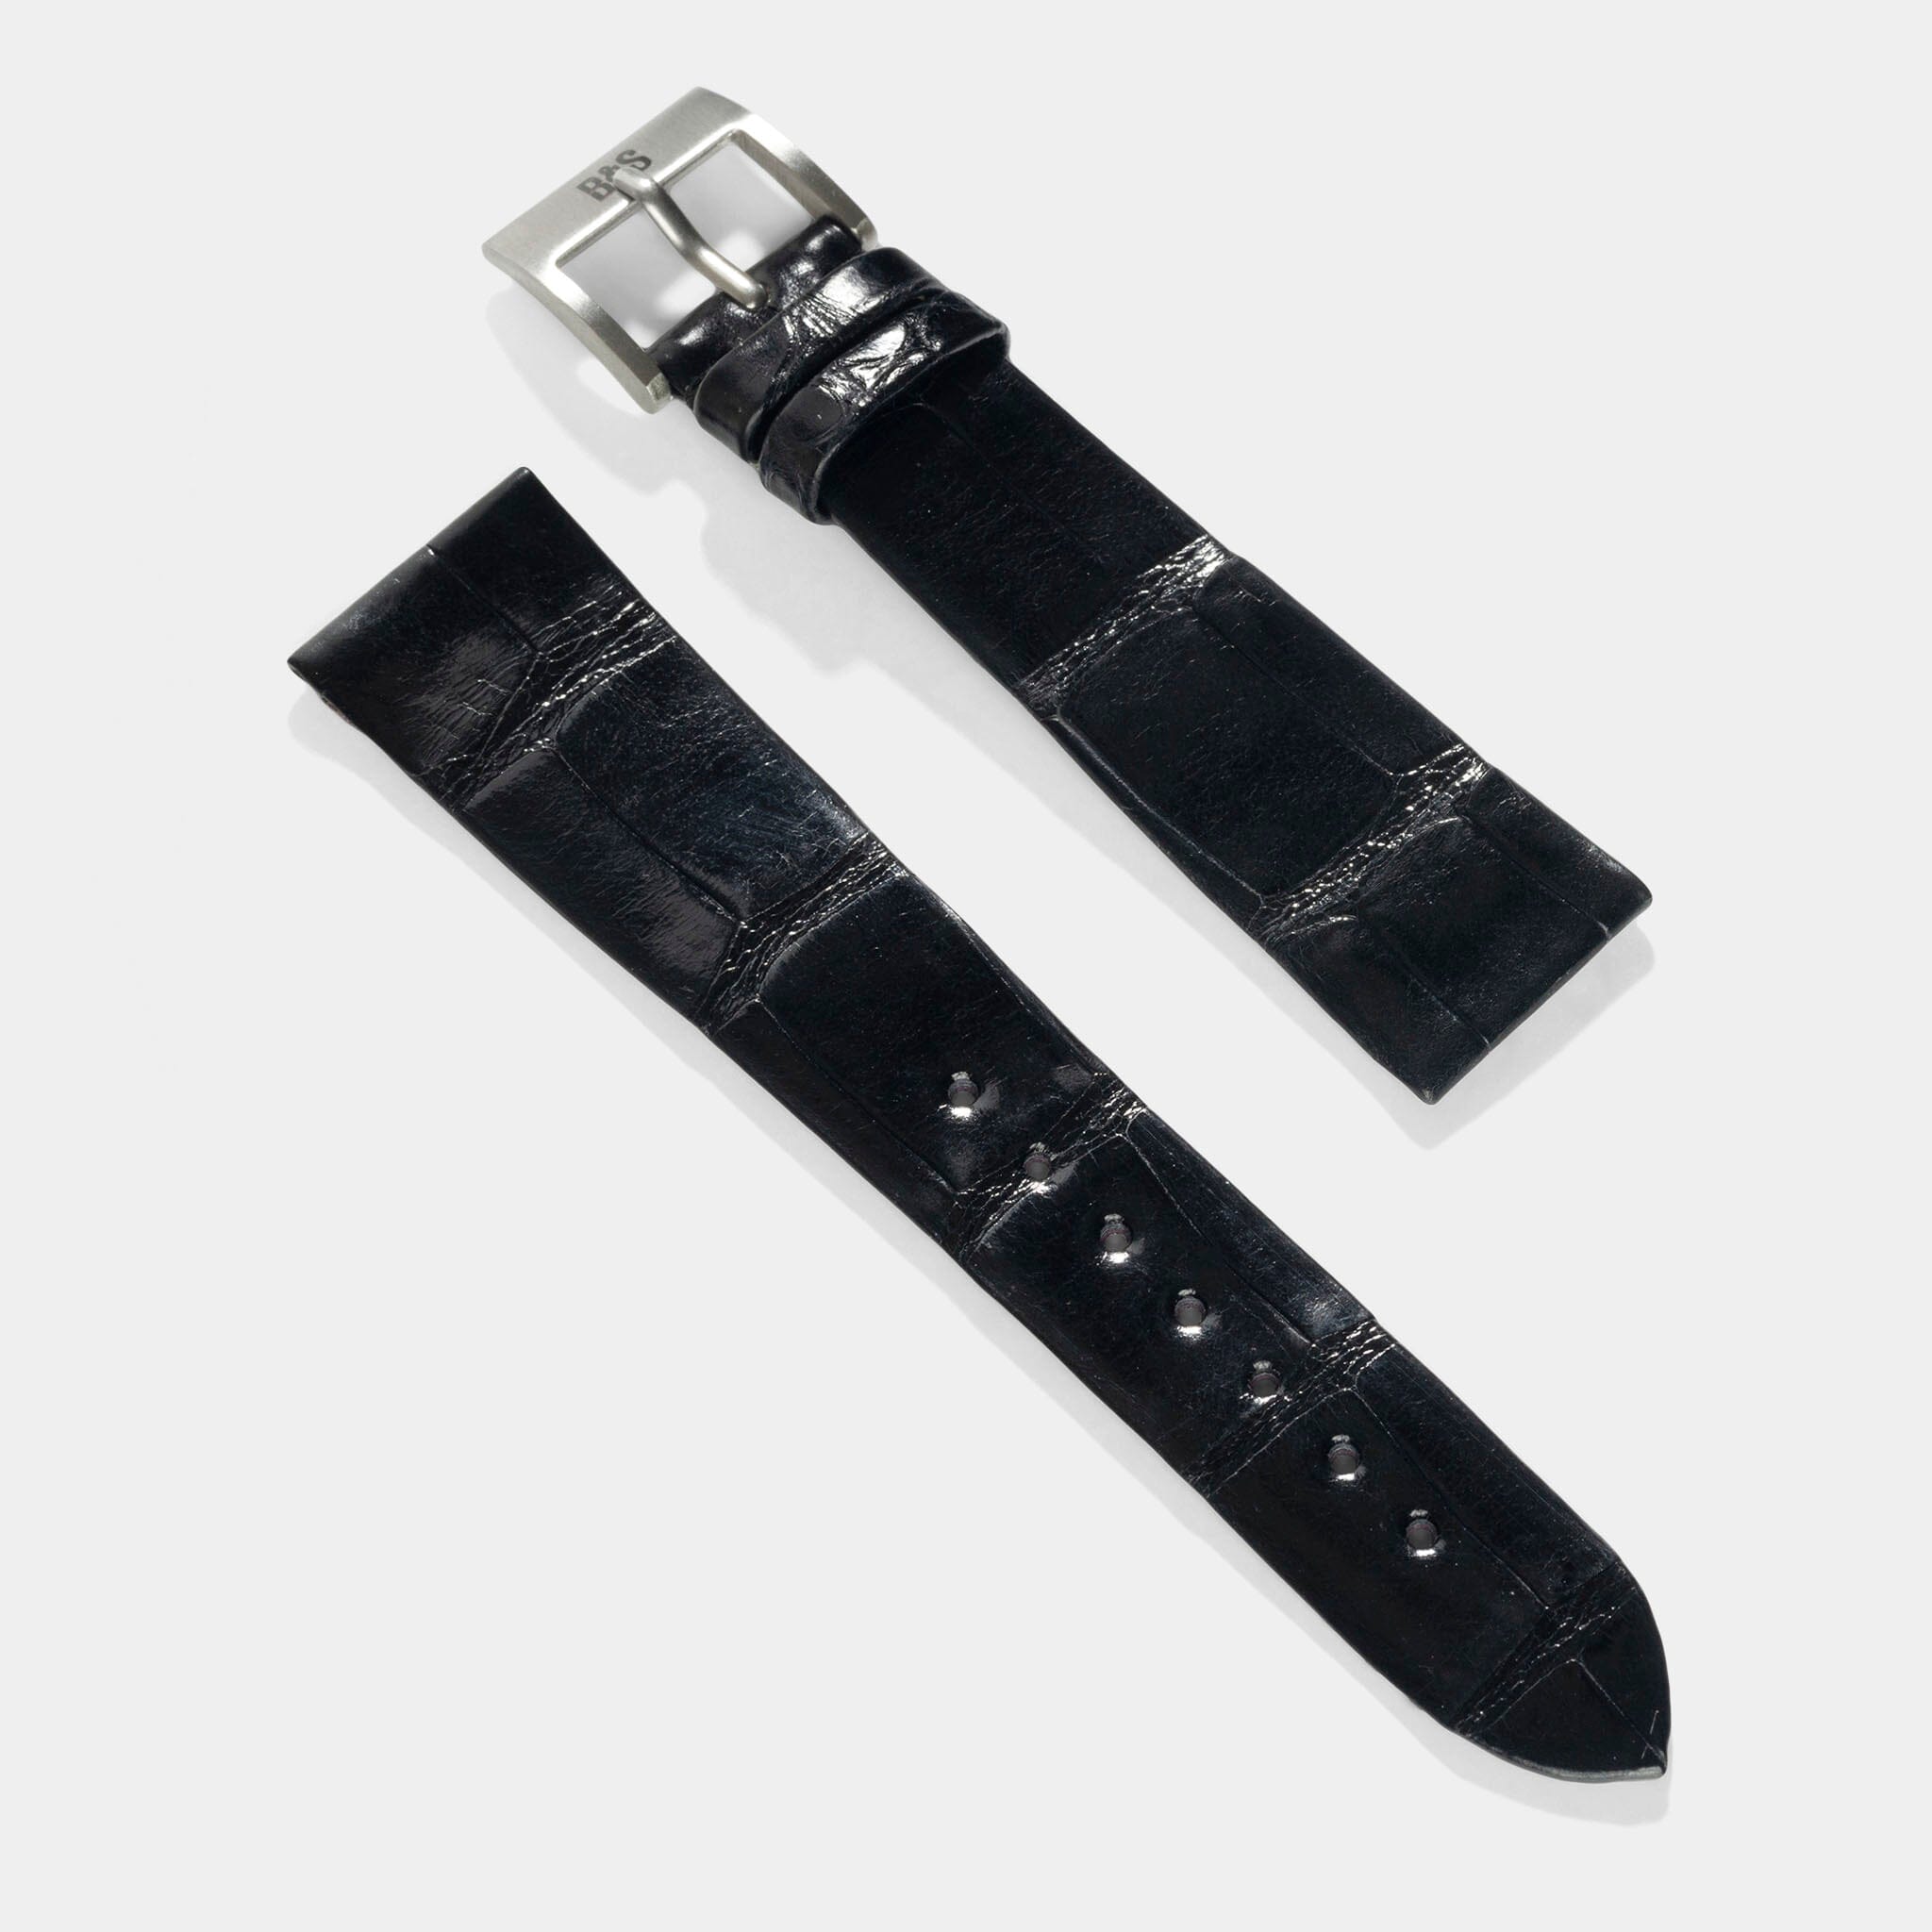 The Savile Row Leather Watch Strap - Luxury Tailored Alligator - Jubilee Edition